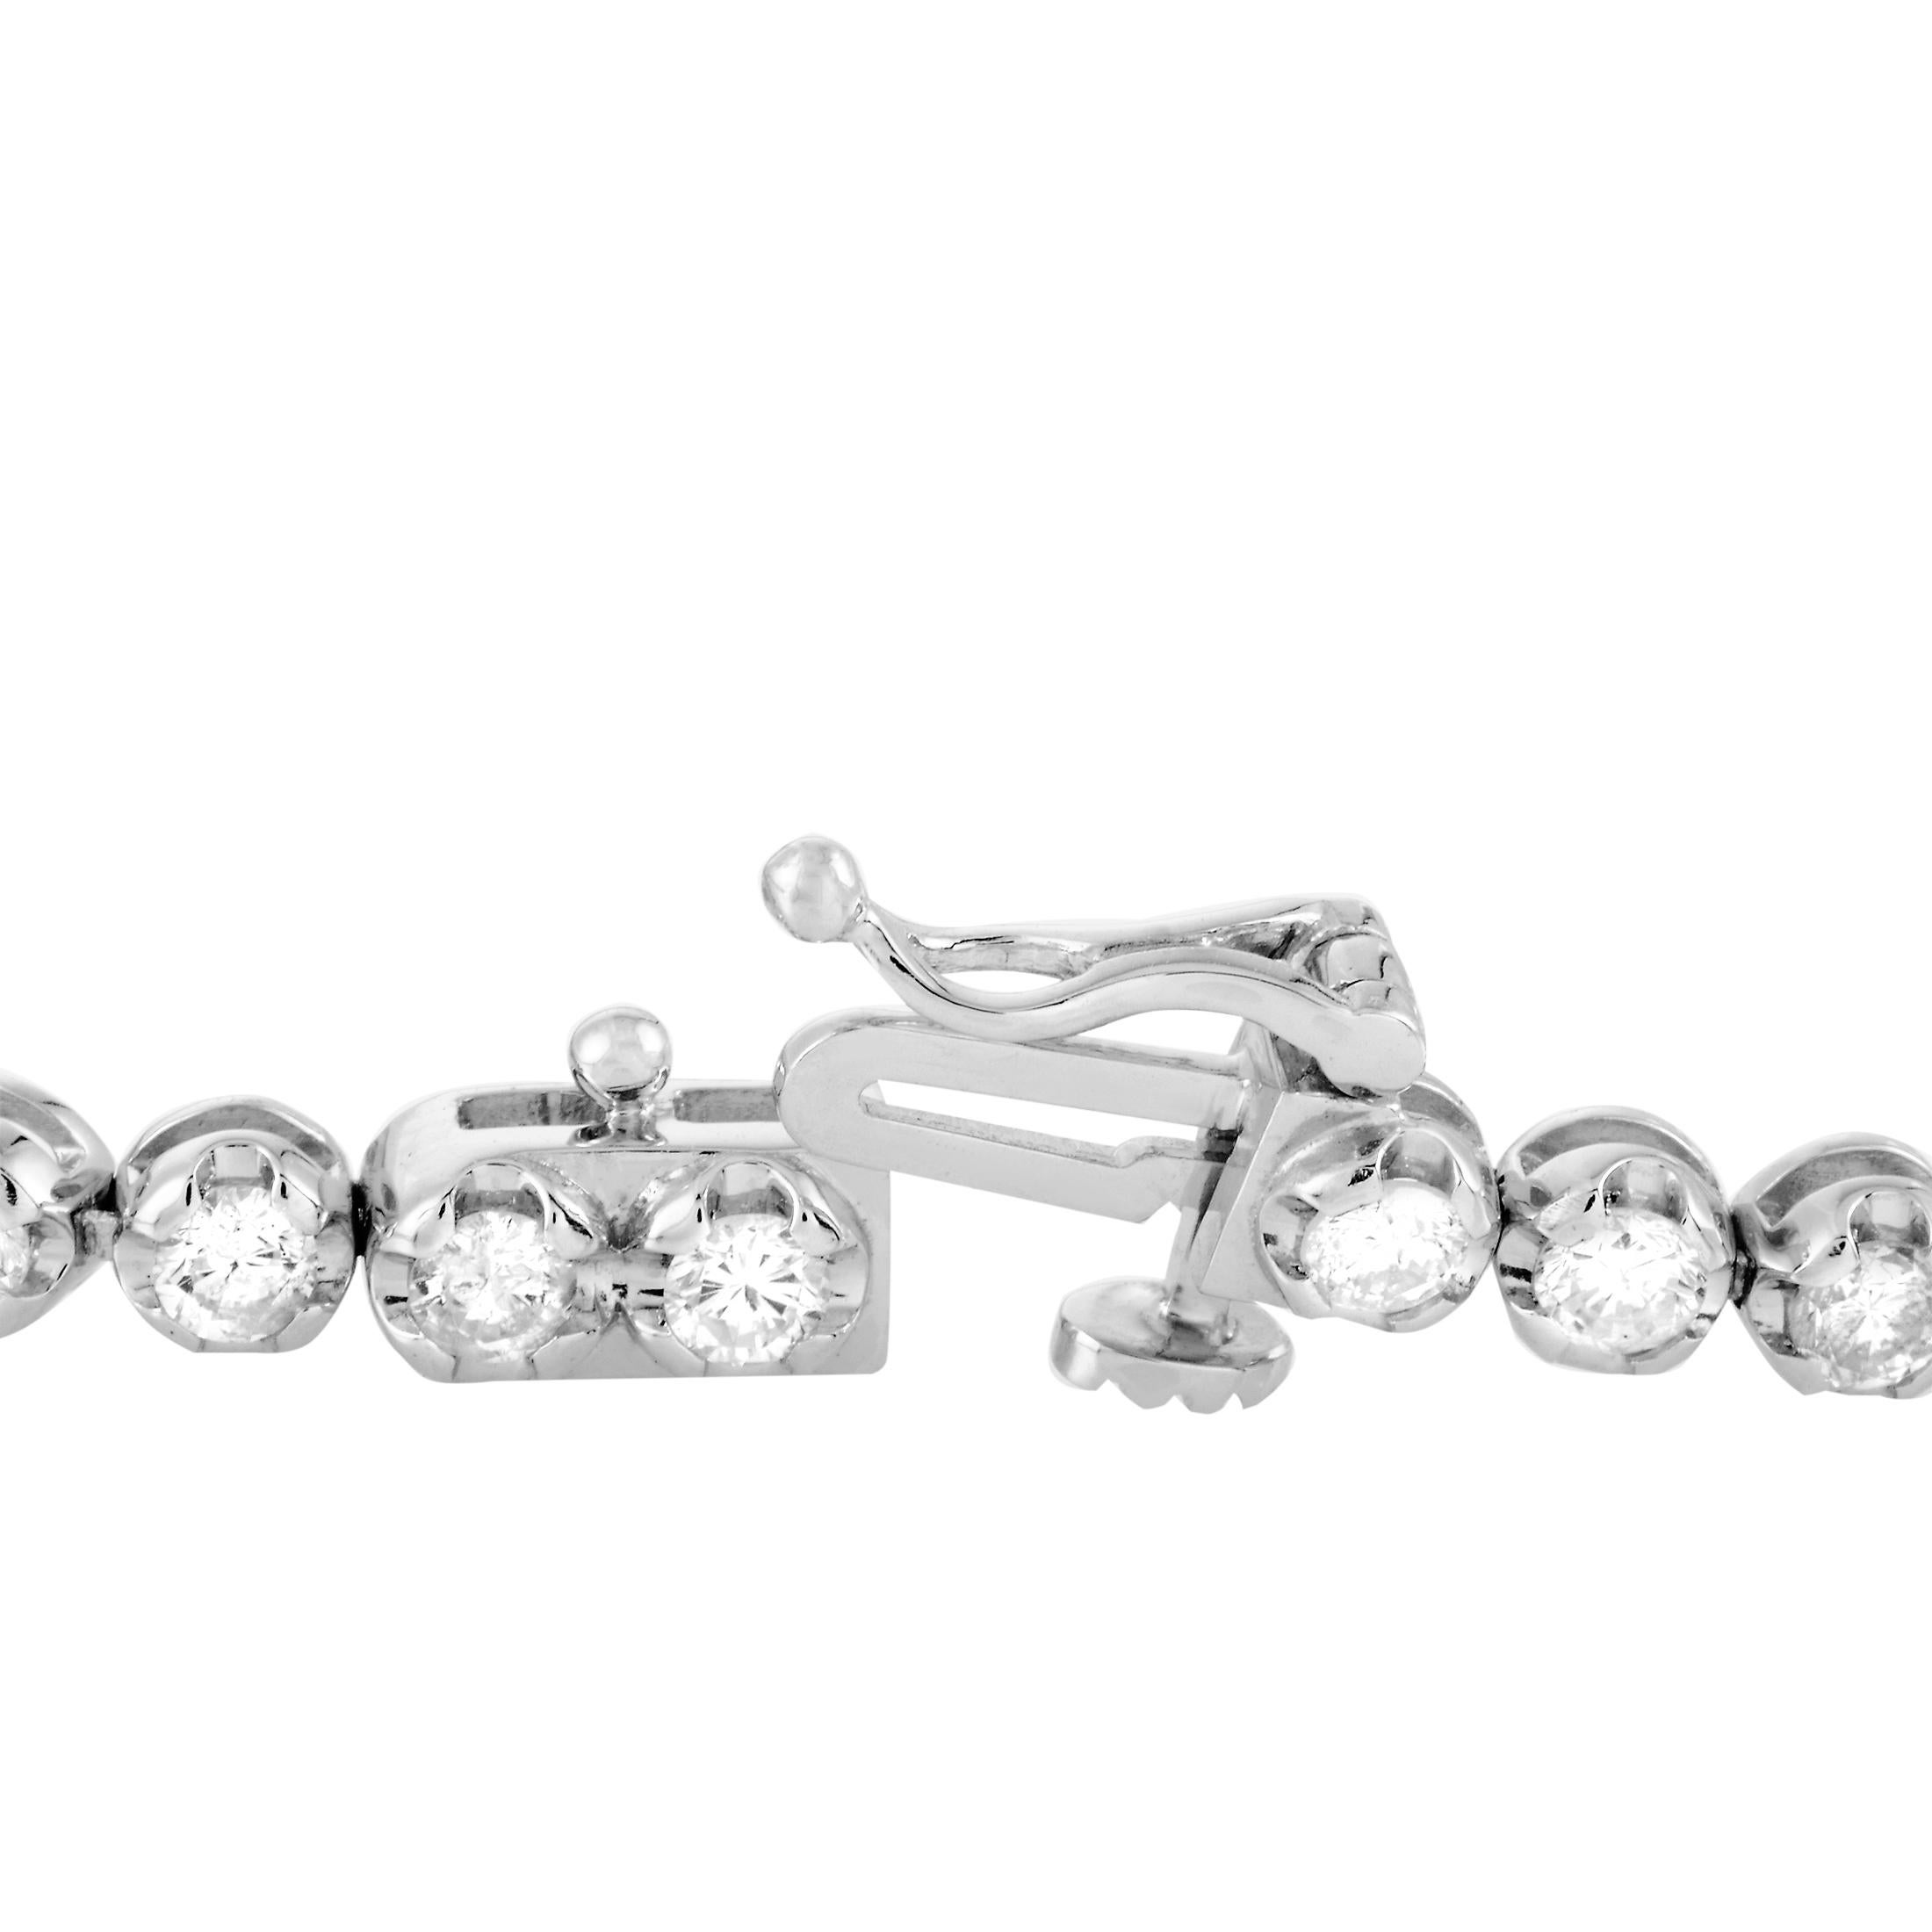 This LB Exclusive tennis bracelet is made out of 14K white gold and diamonds that total 3.00 carats. The bracelet weighs 7.5 grams and measures 7” in length.

Offered in brand new condition, this jewelry piece includes a gift box.